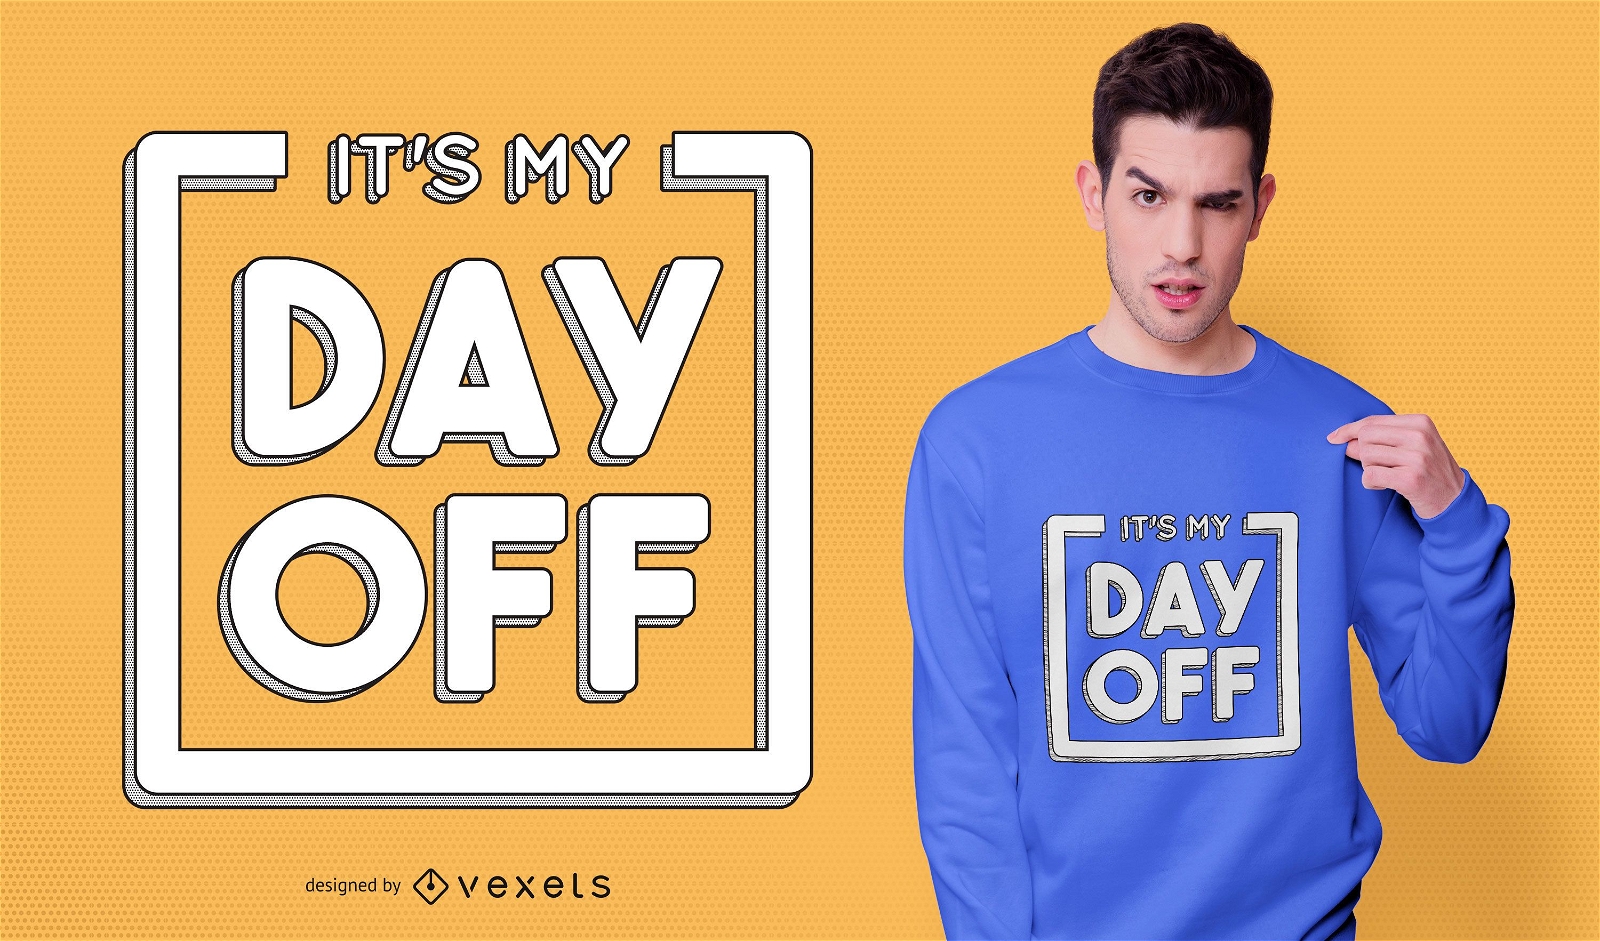 Day off quote t-shirt design